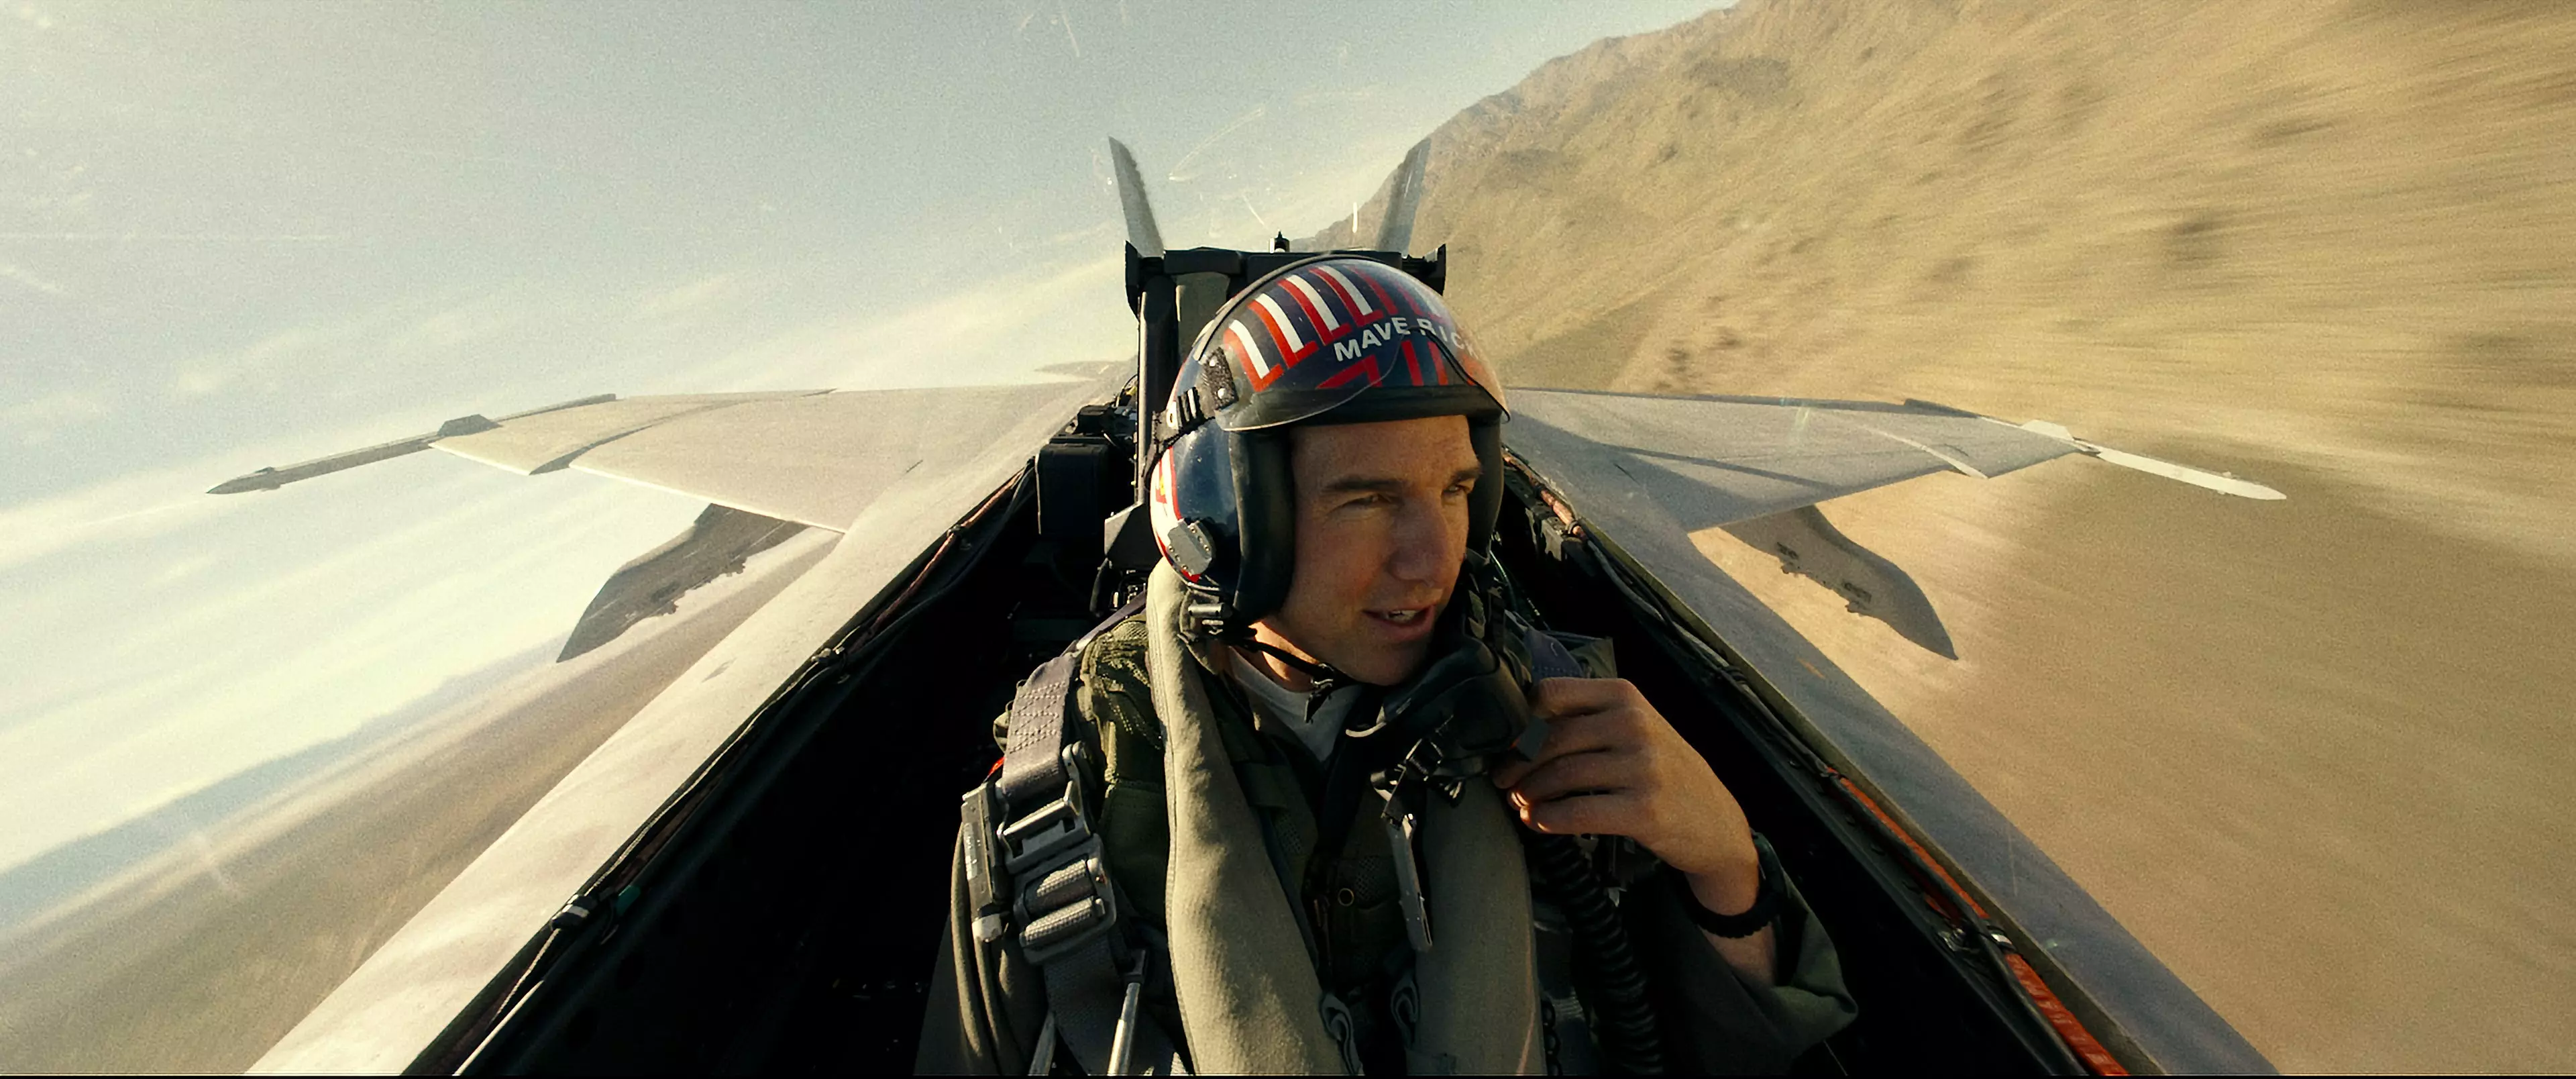 Capt. Pete "Maverick" Mitchell (Tom Cruise) trains a squad of young fighter pilots for a dangerous mission in the sequel "Top Gun: Maverick."